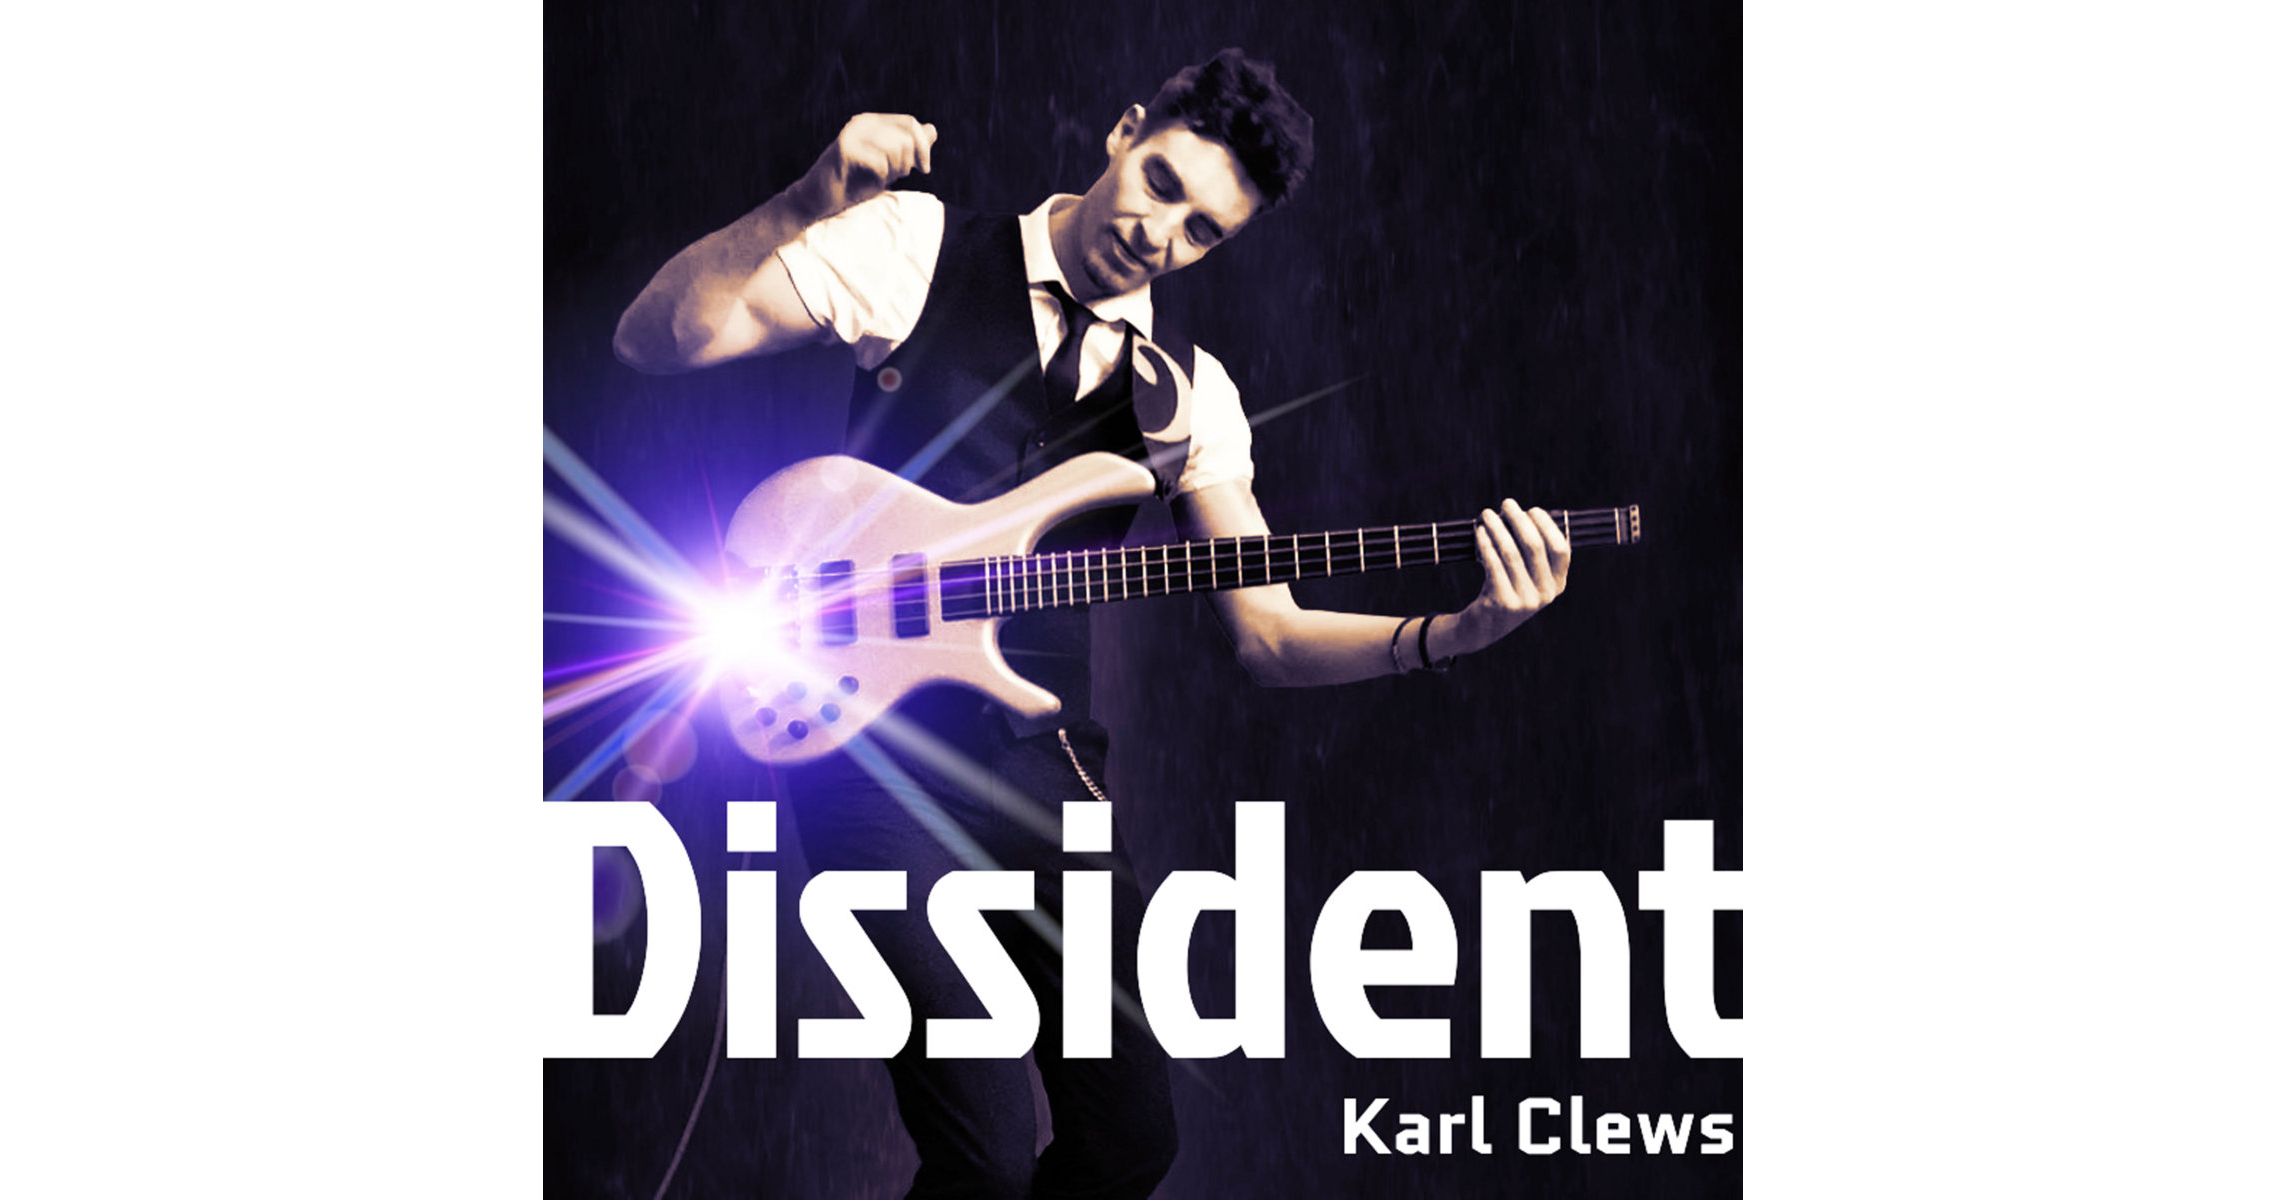 Karl Clews: Dissident